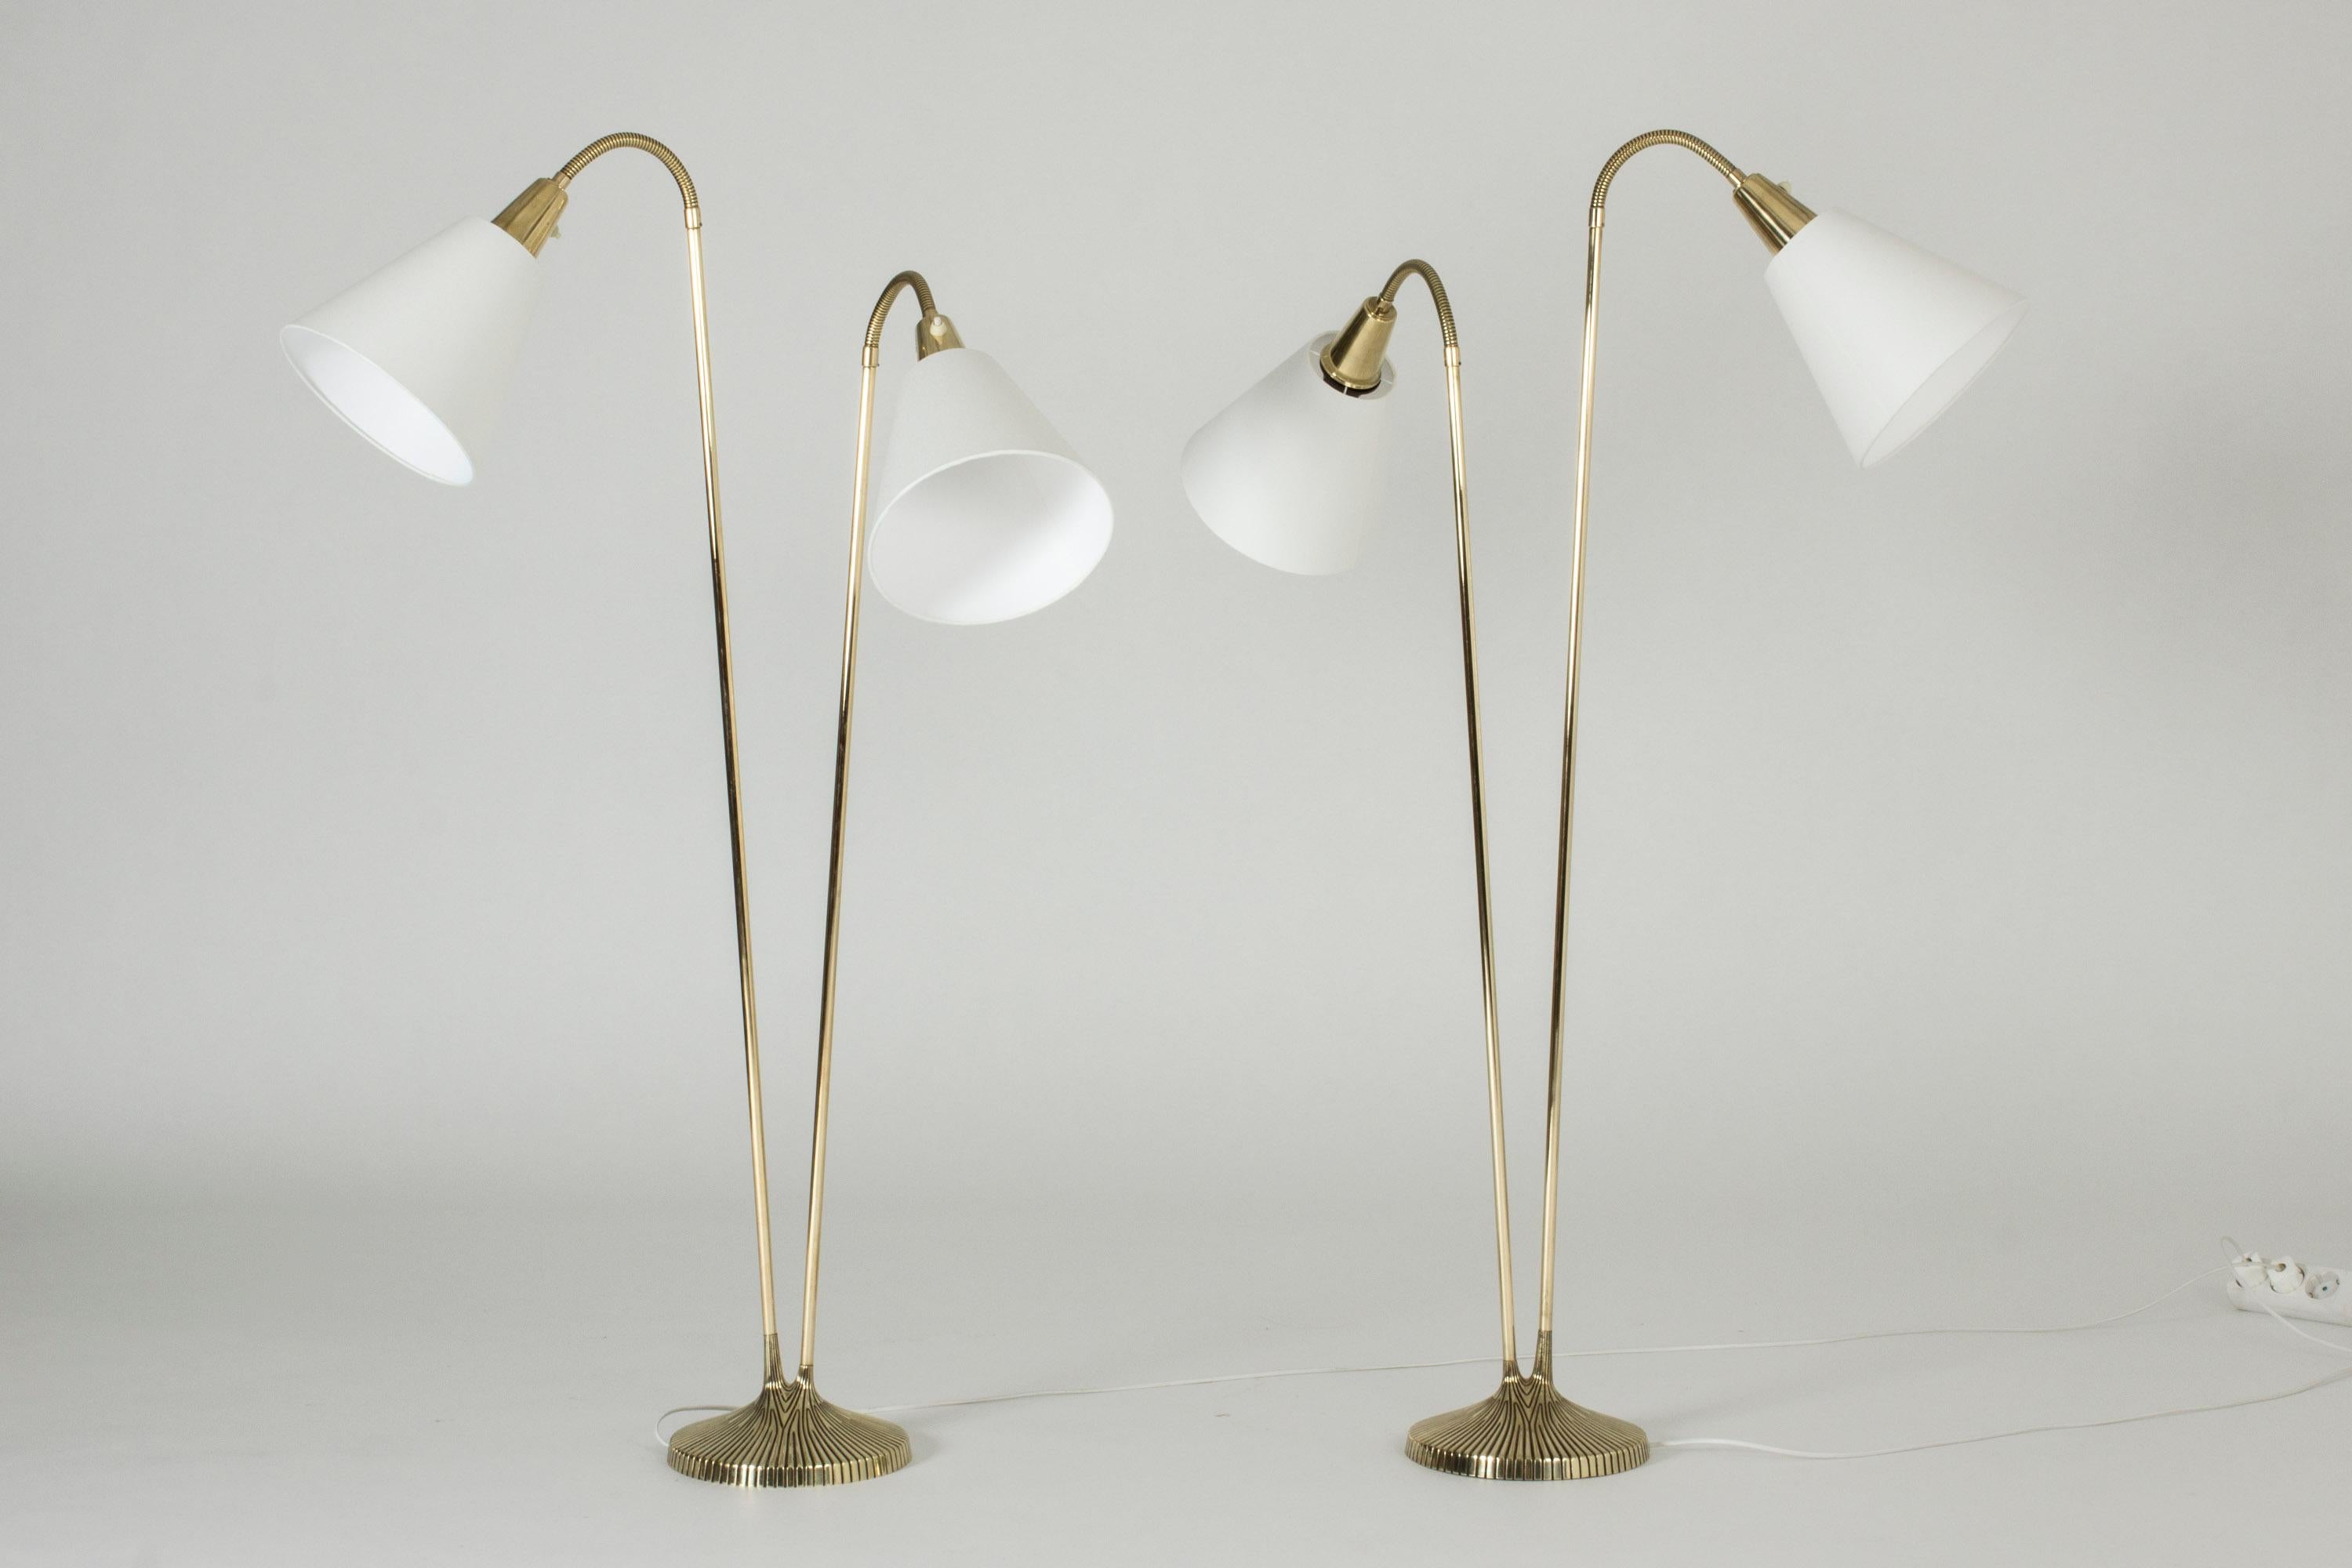 Pair of beautiful brass floor lamps by Sonja Katzin, each with two lamp shades, shooting up from a round base. The bases are embossed with a tree bark-like pattern and the bases of the handles look like twigs with slightly different lengths.